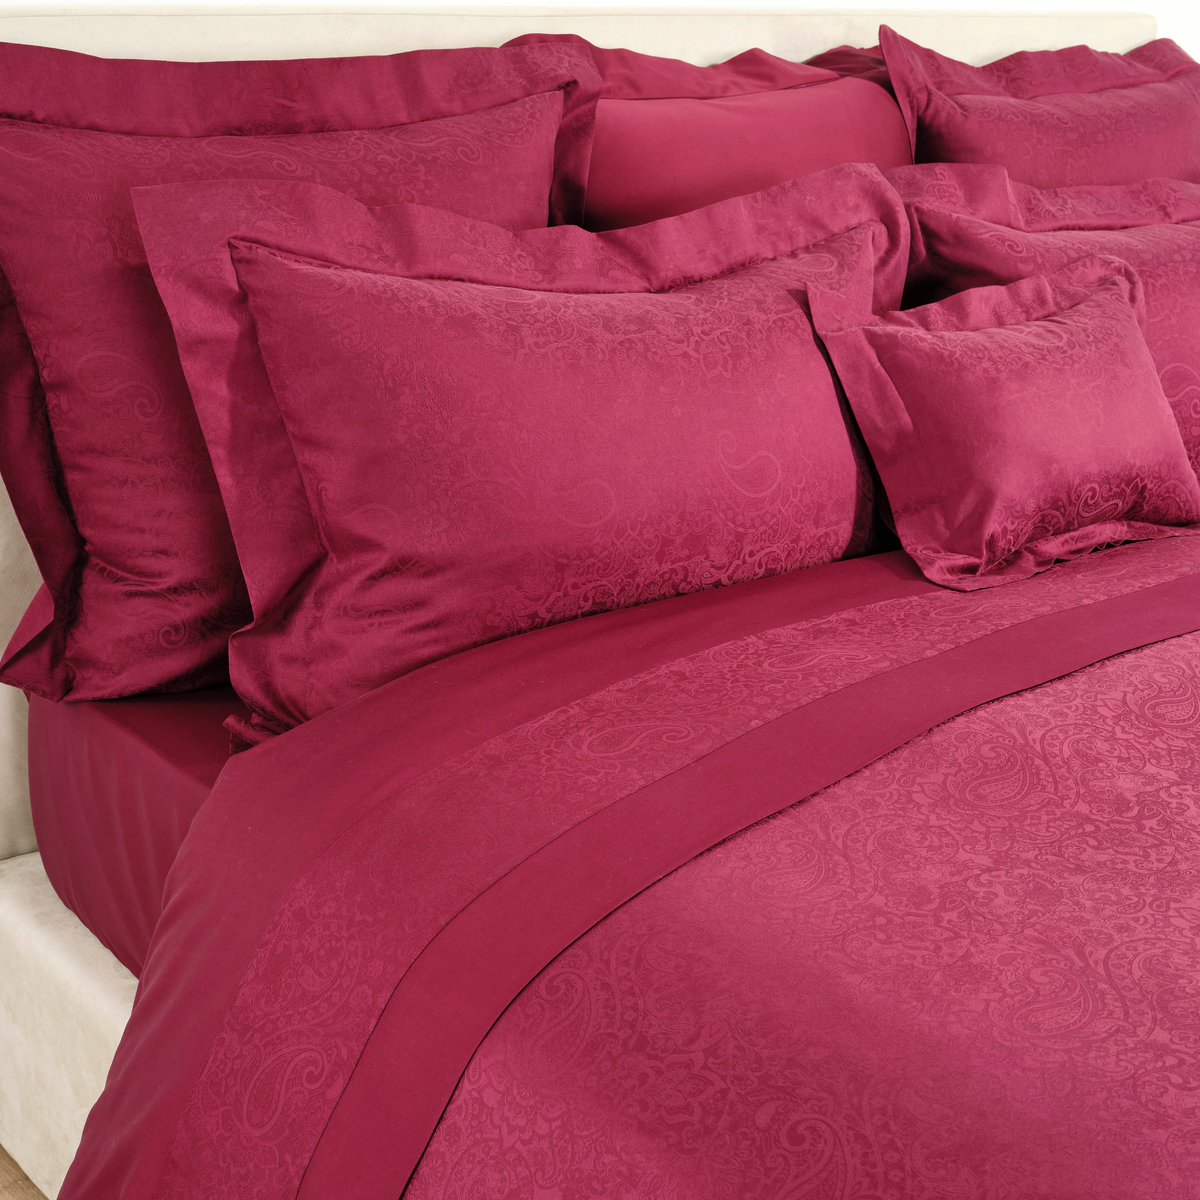 Pillowcases of Celso de Lemos Joanne Collection in Rubis Color